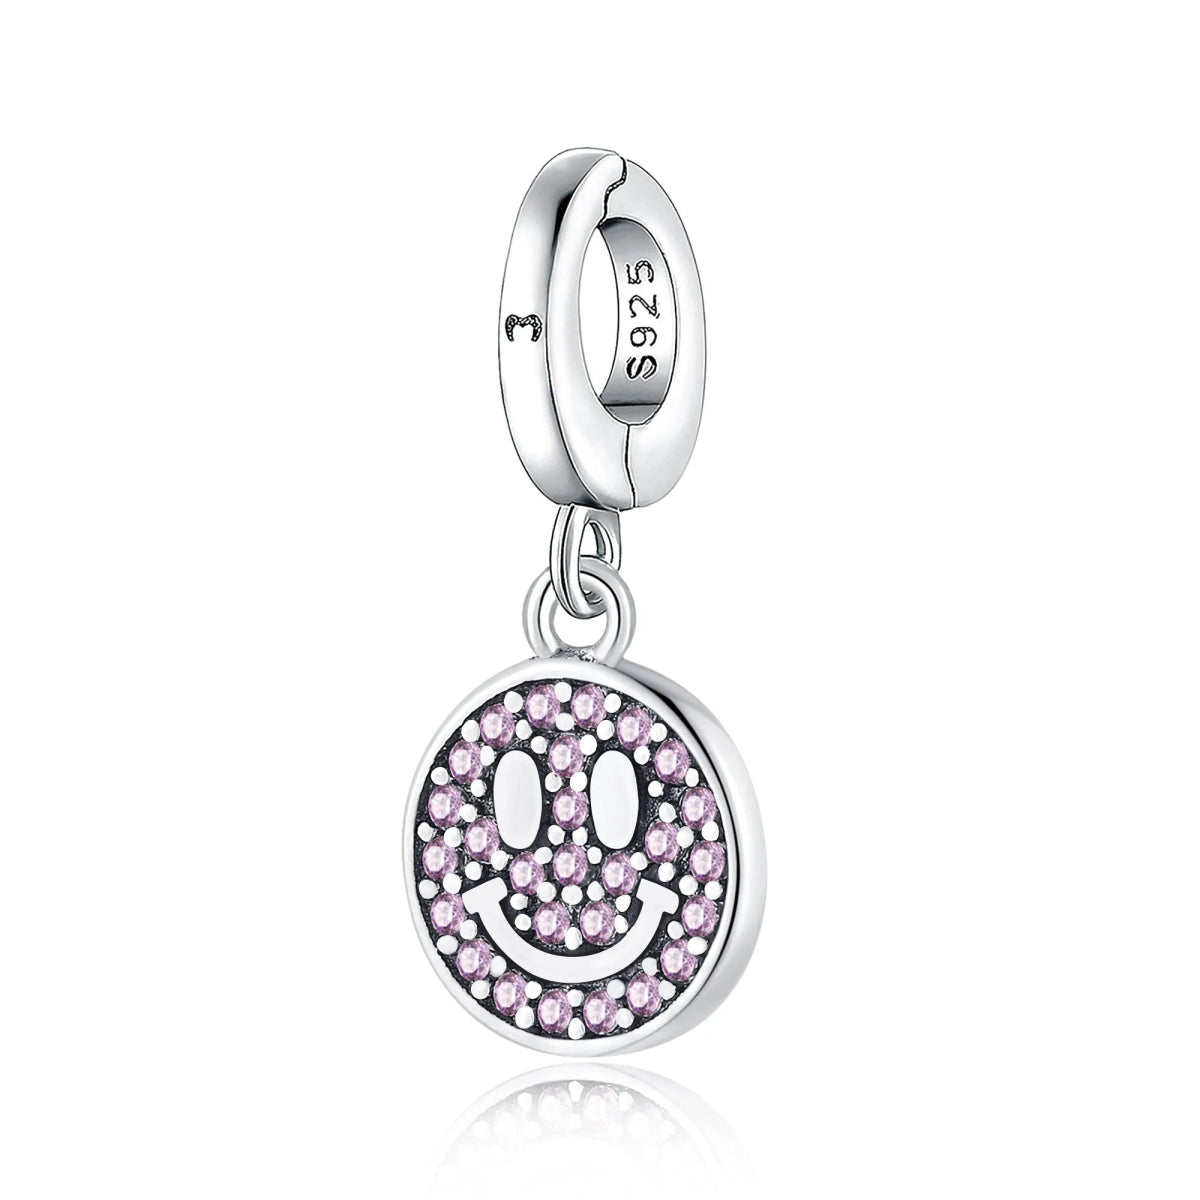 "Smiley Face" Charm - Milas Jewels Shop